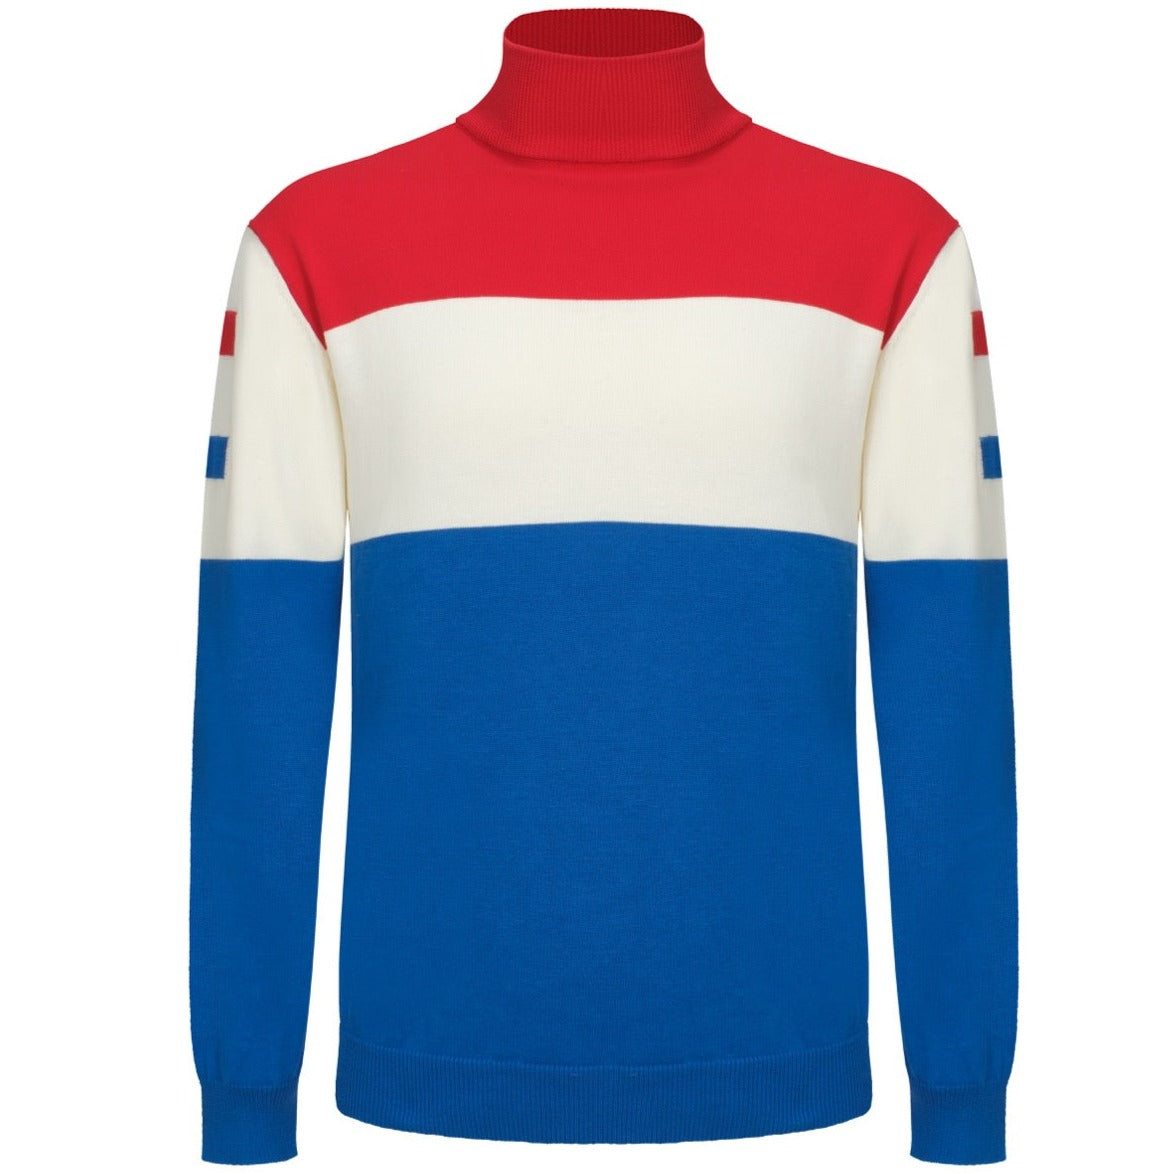 OXKNIT Men Vintage Clothing 1960s Mod Style Casual Long Sleeve Red & Blue Racing Retro Jumper